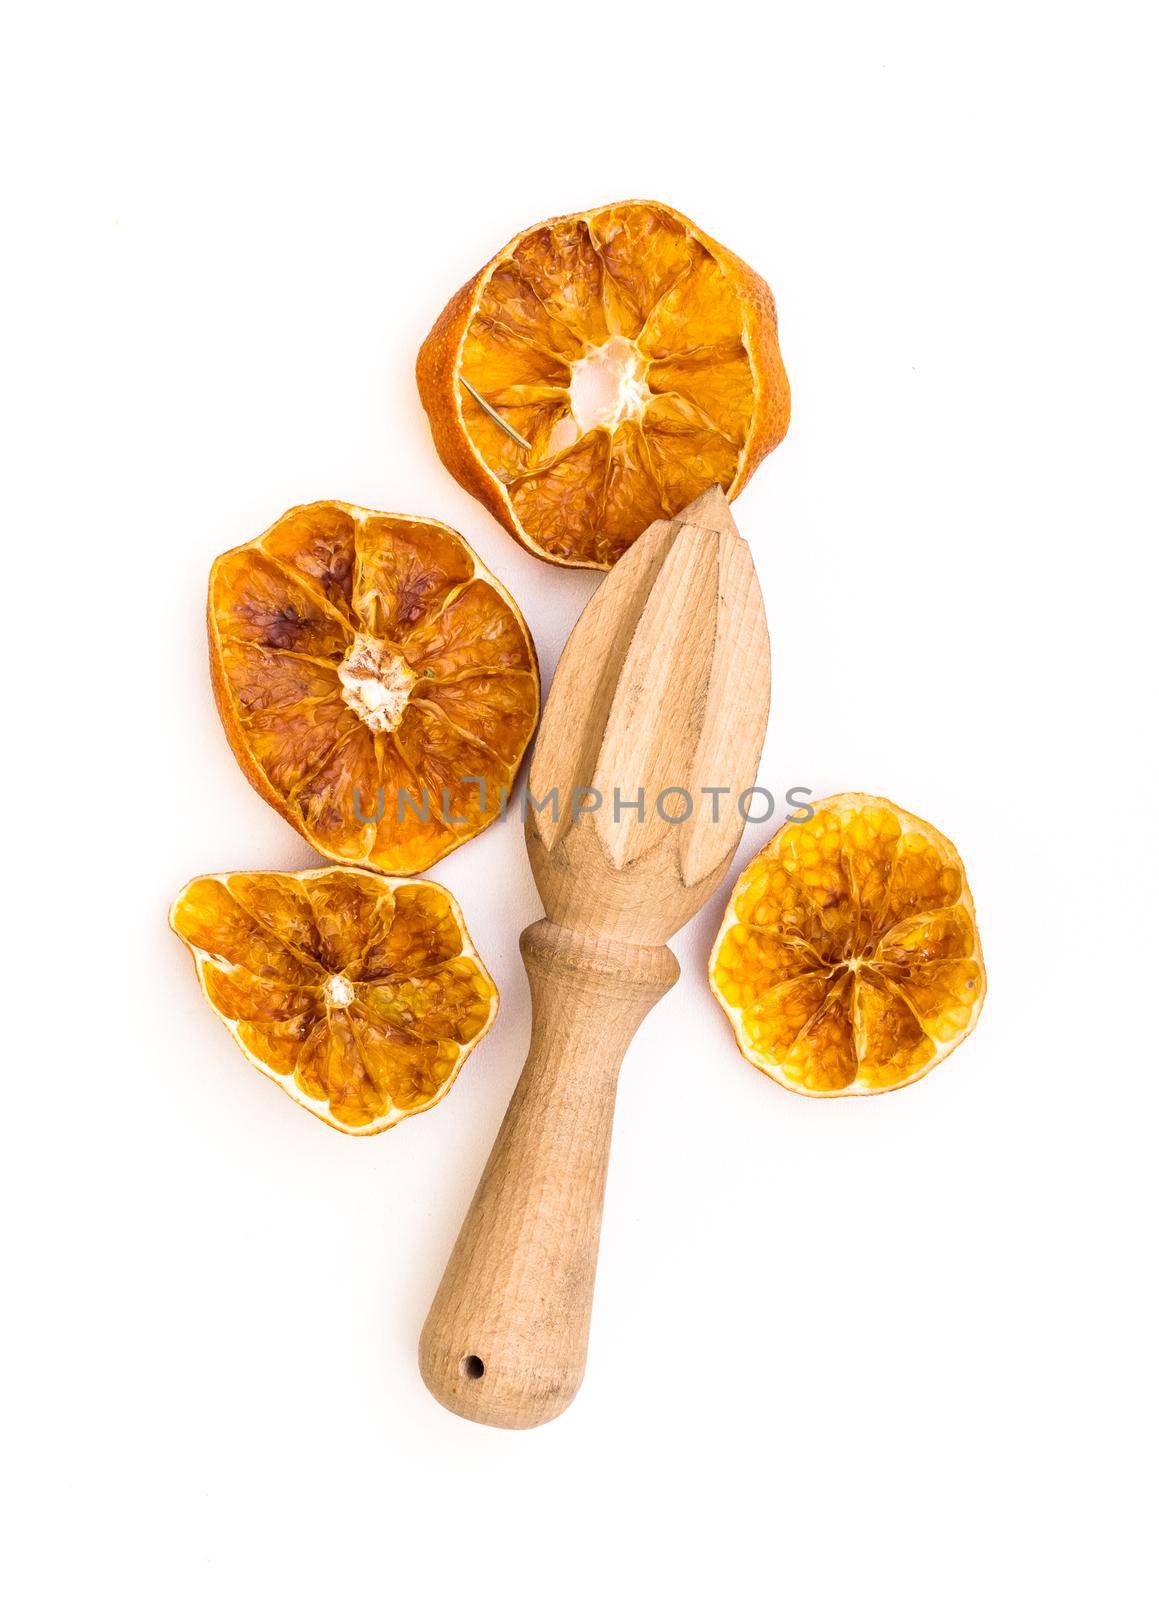 Dried lemon and whisk isolated on a white background